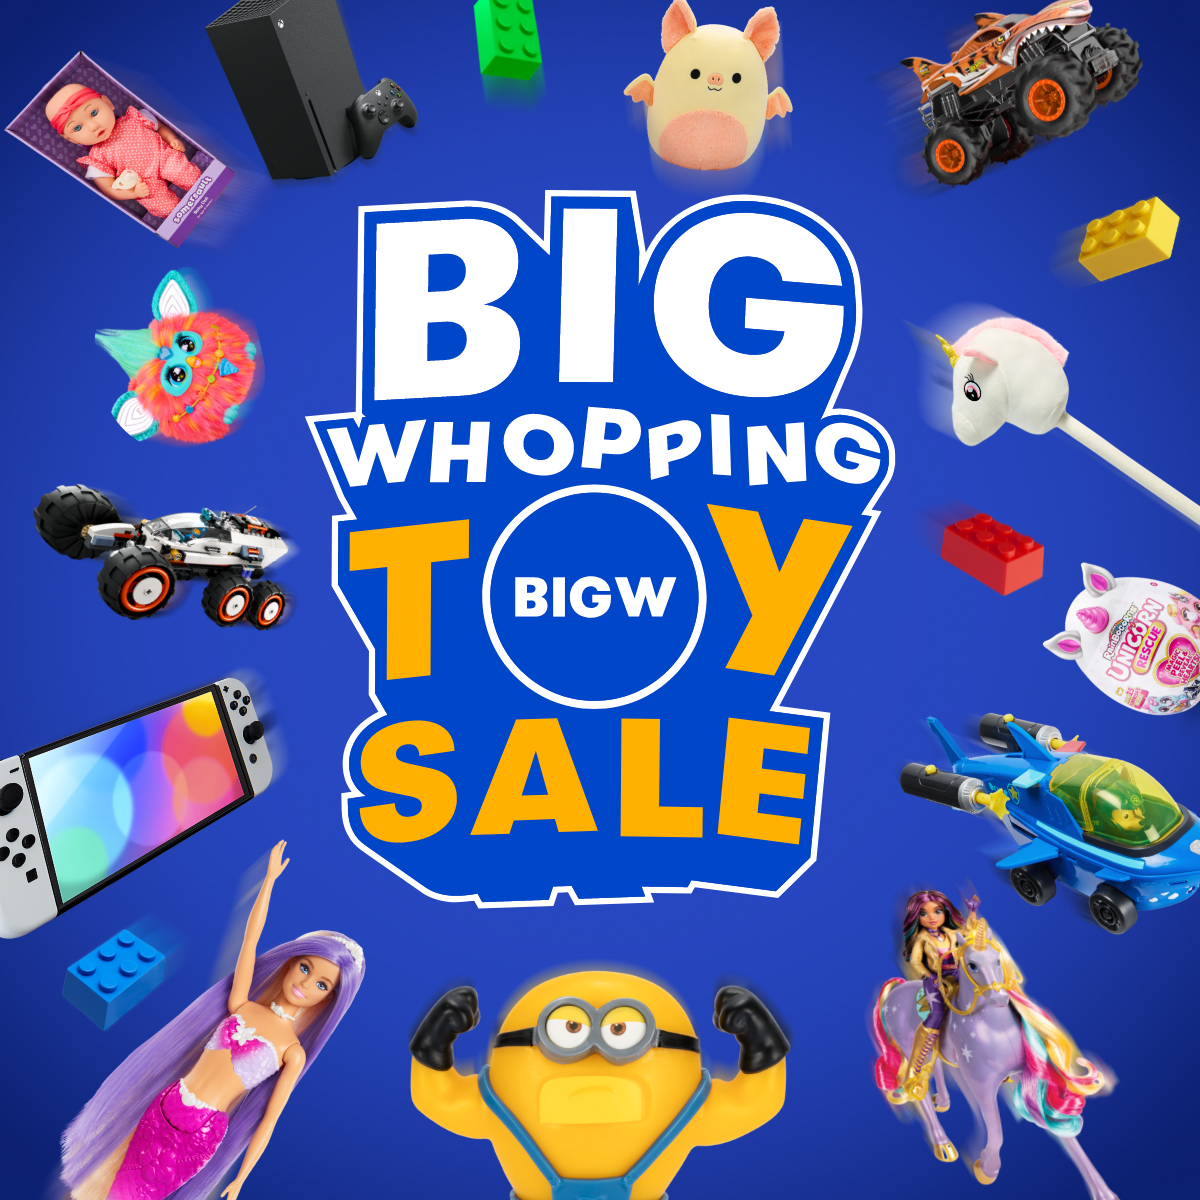 BIG W: The big whopping toy sale at BIG W is now on at Westfield Tea ...